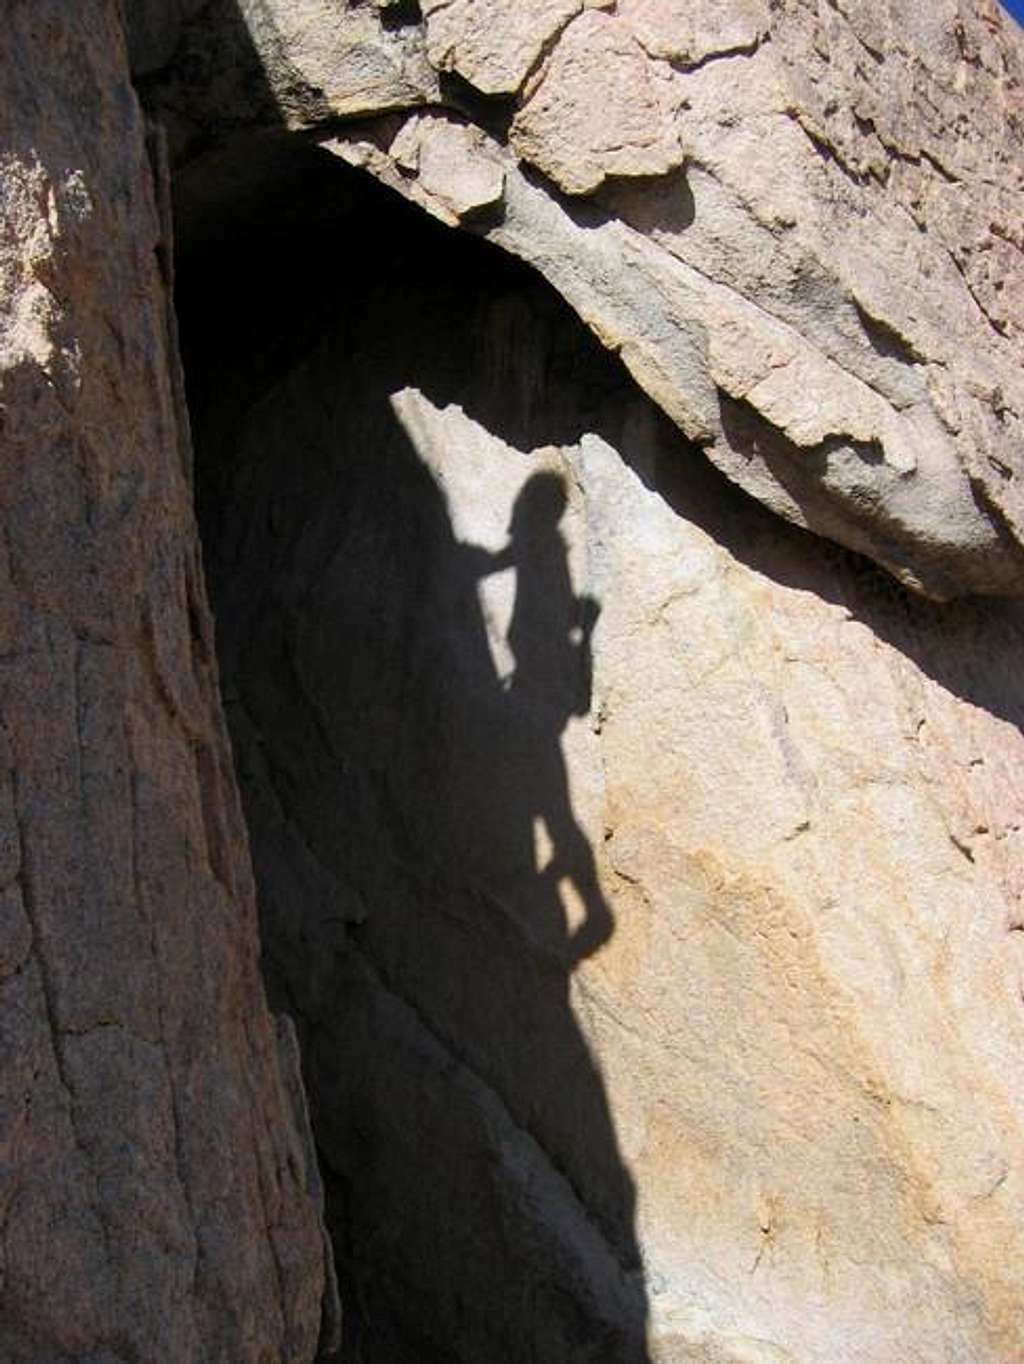 Shadow climbers are a common...